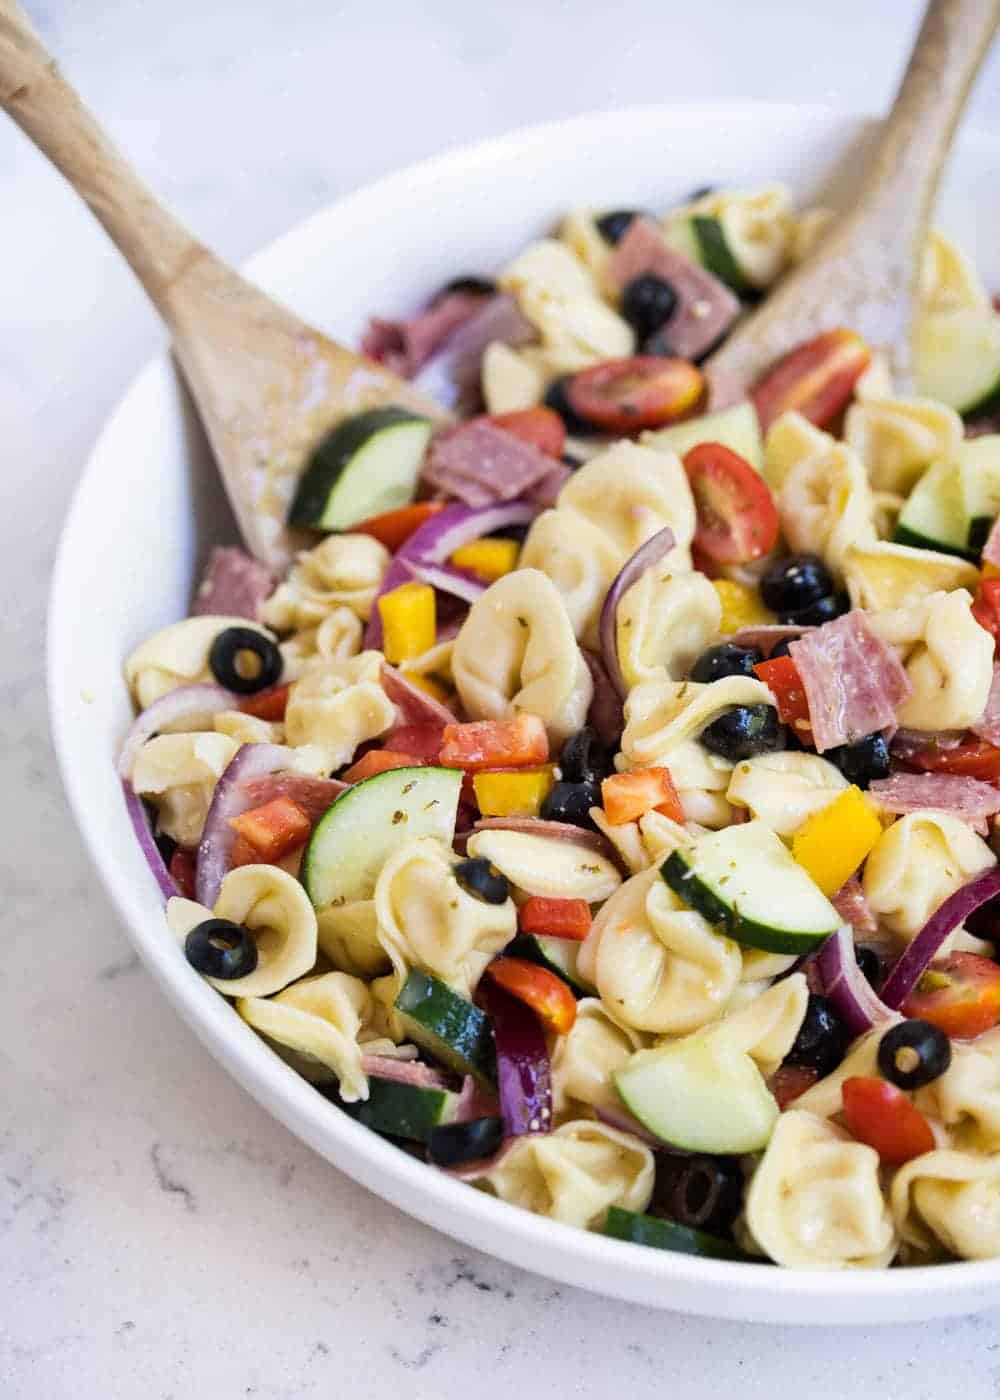 Italian tortellini pasta salad in a bowl with a wooden spoon.